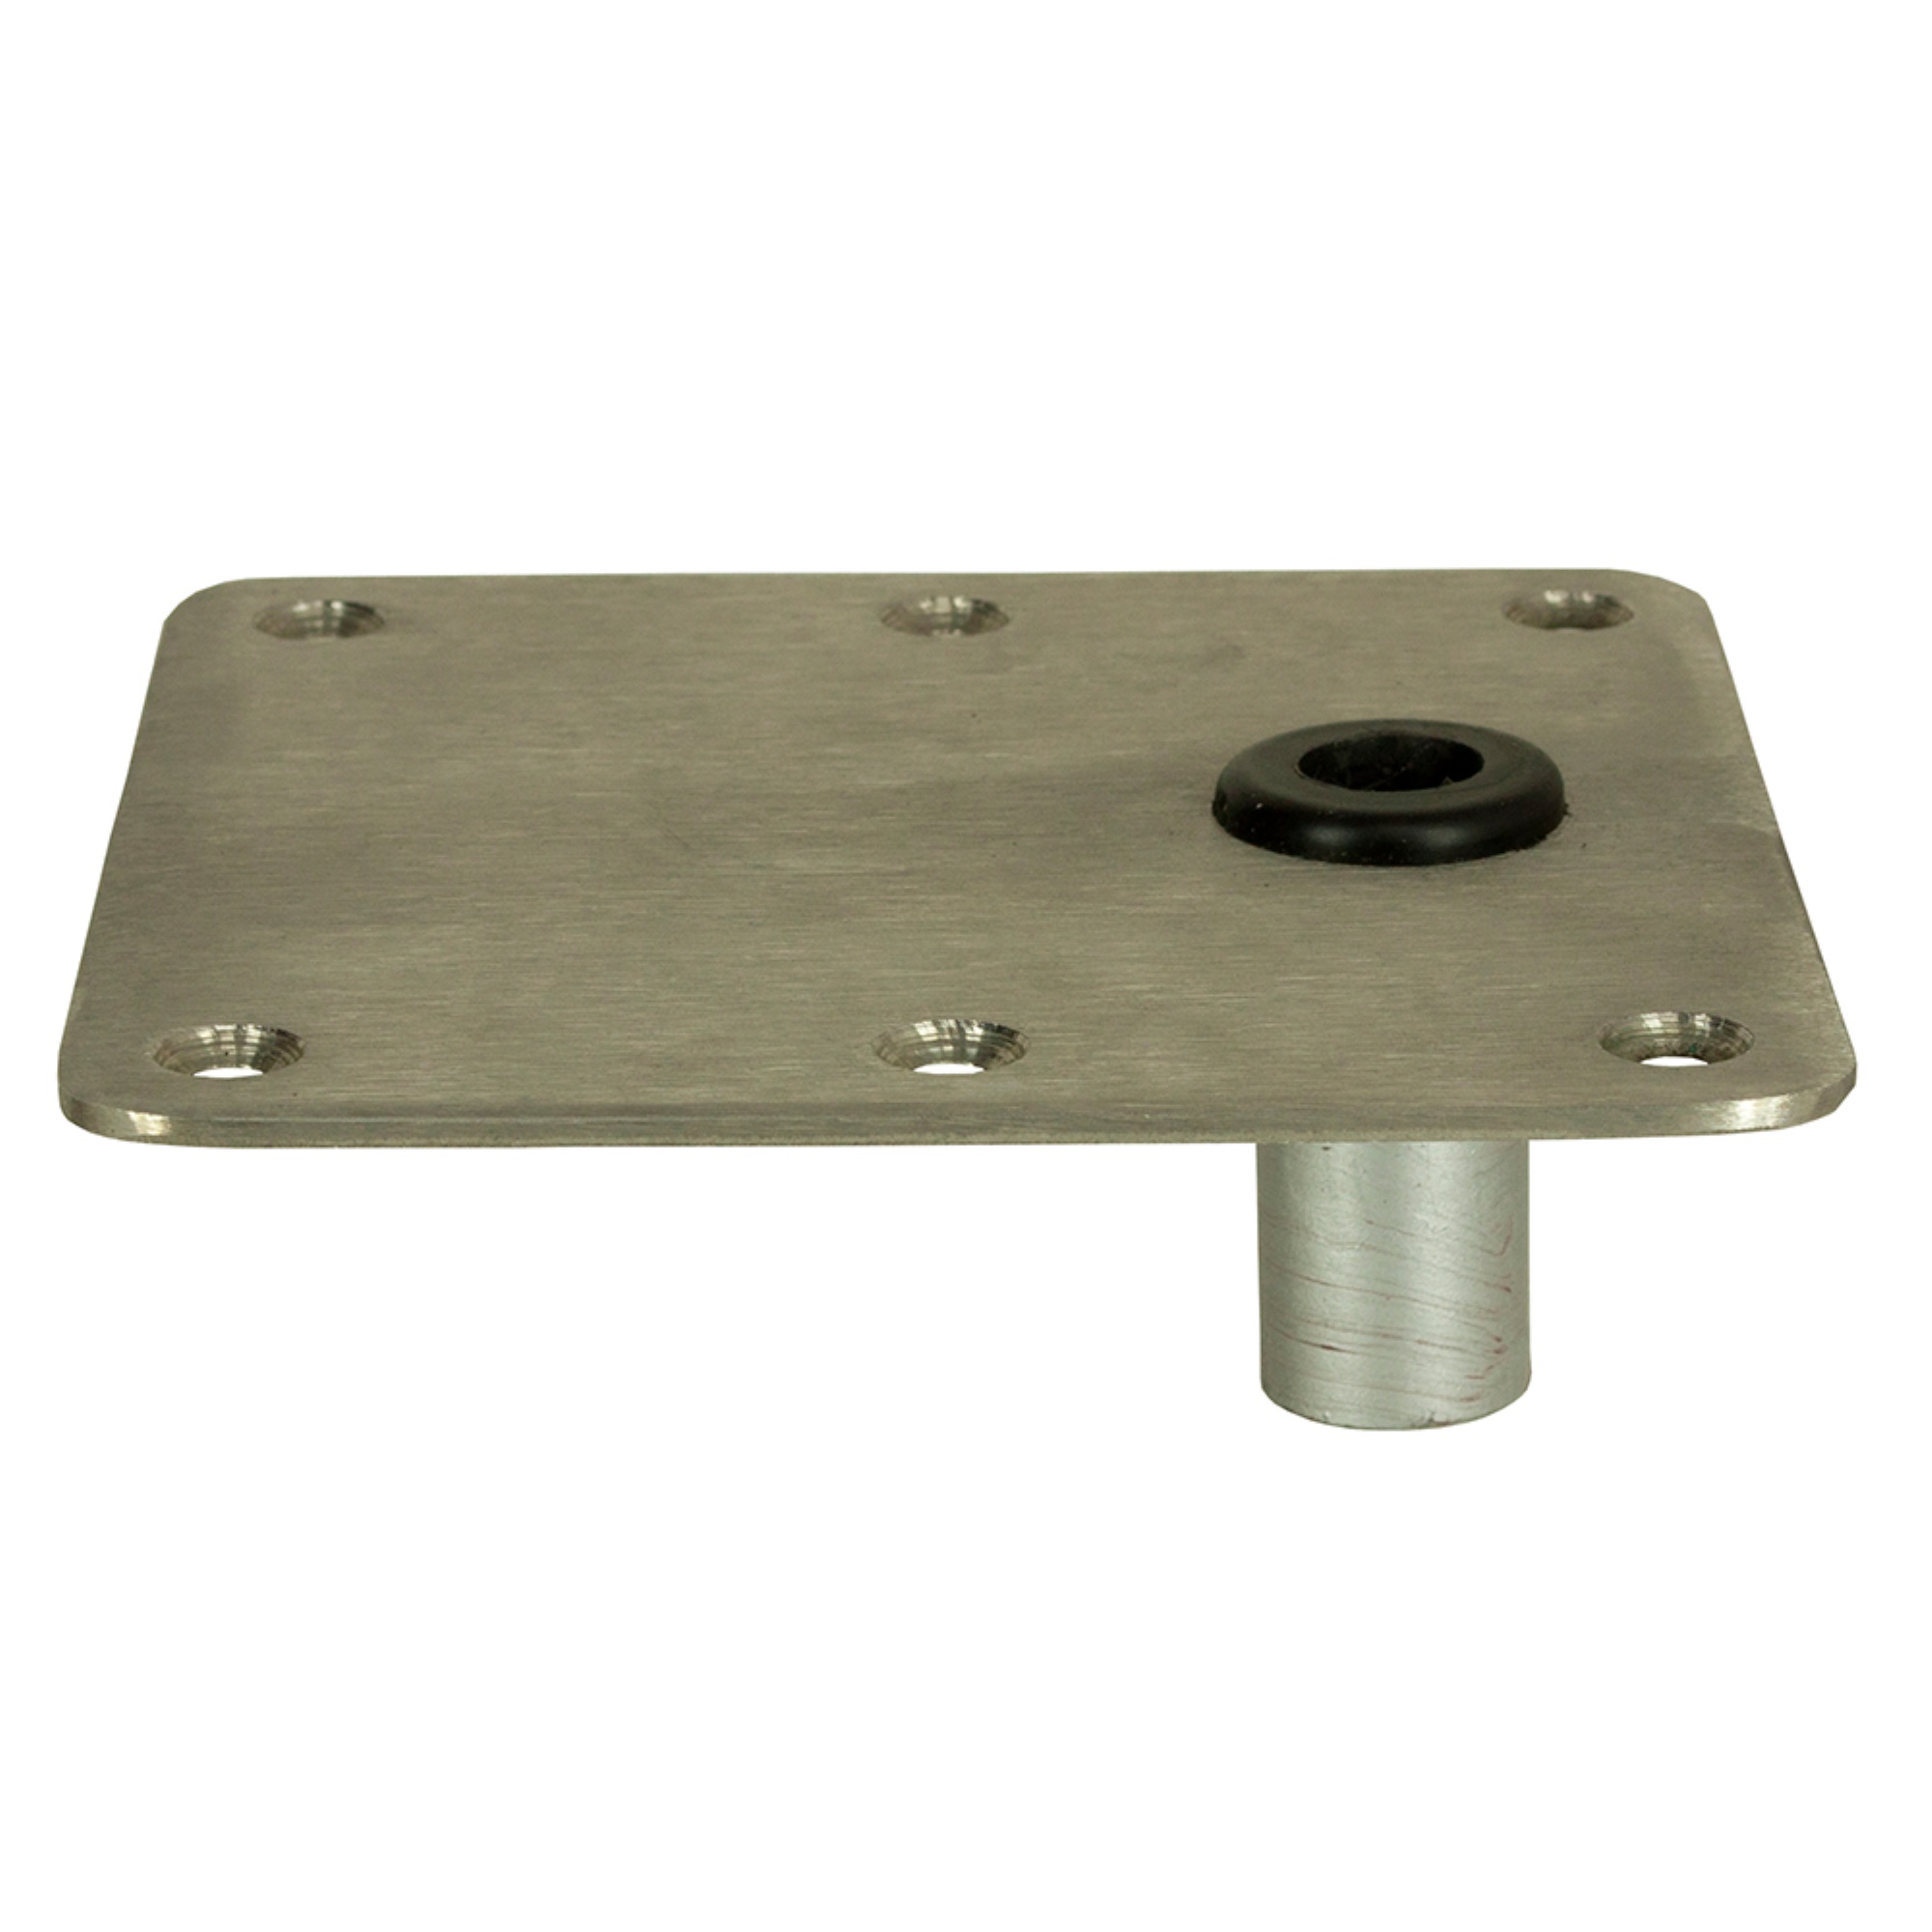 Springfield Marine Springfield KingPin&trade; 7" x 7" Offset - Stainless Steel - Square Base (Standard)